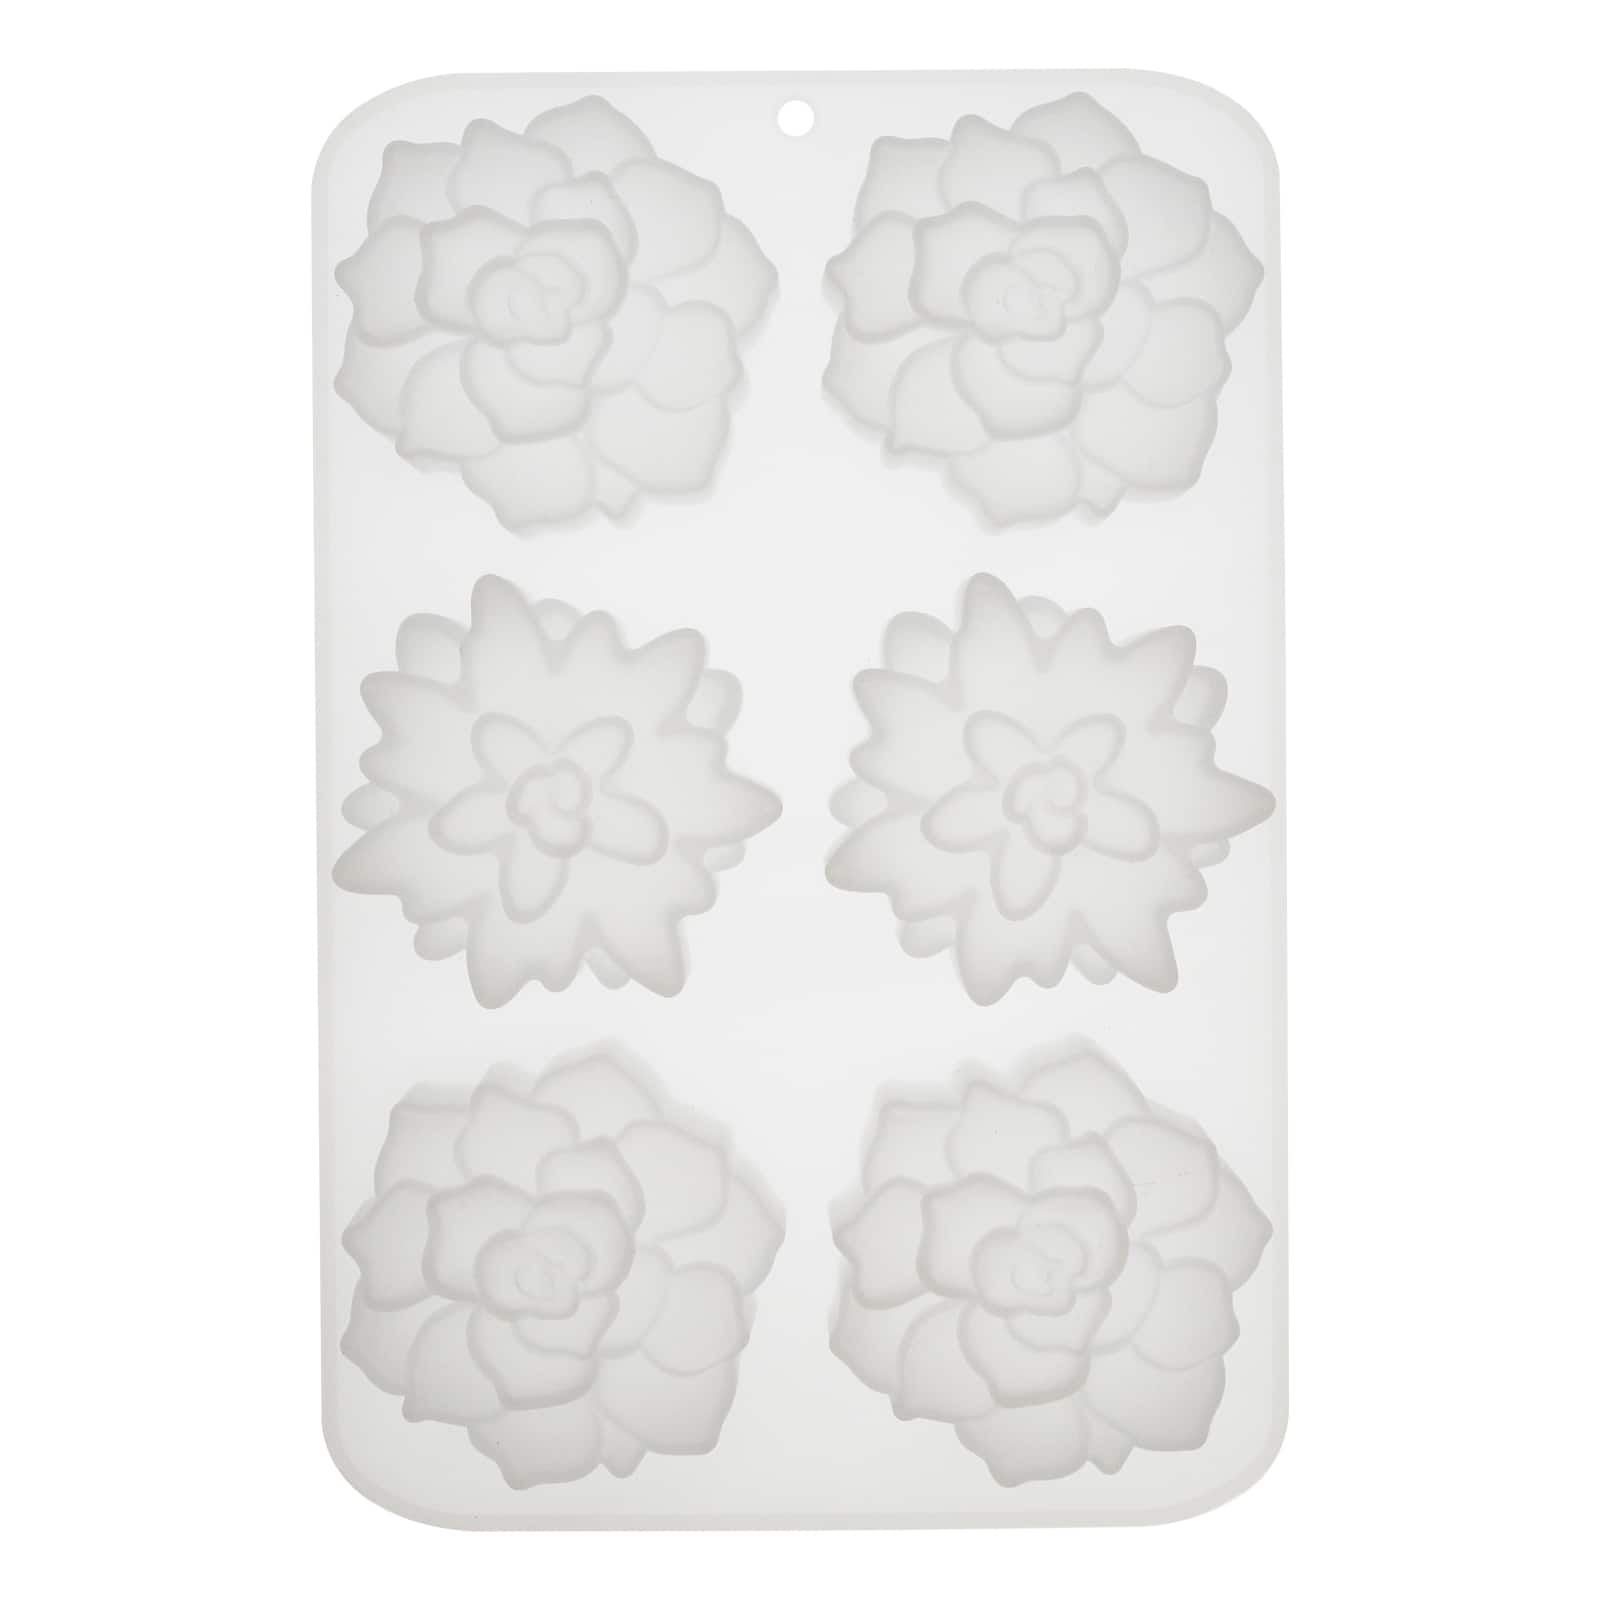 Square Flower Silicone Soap Candle Mold Soap Making Mould DIY